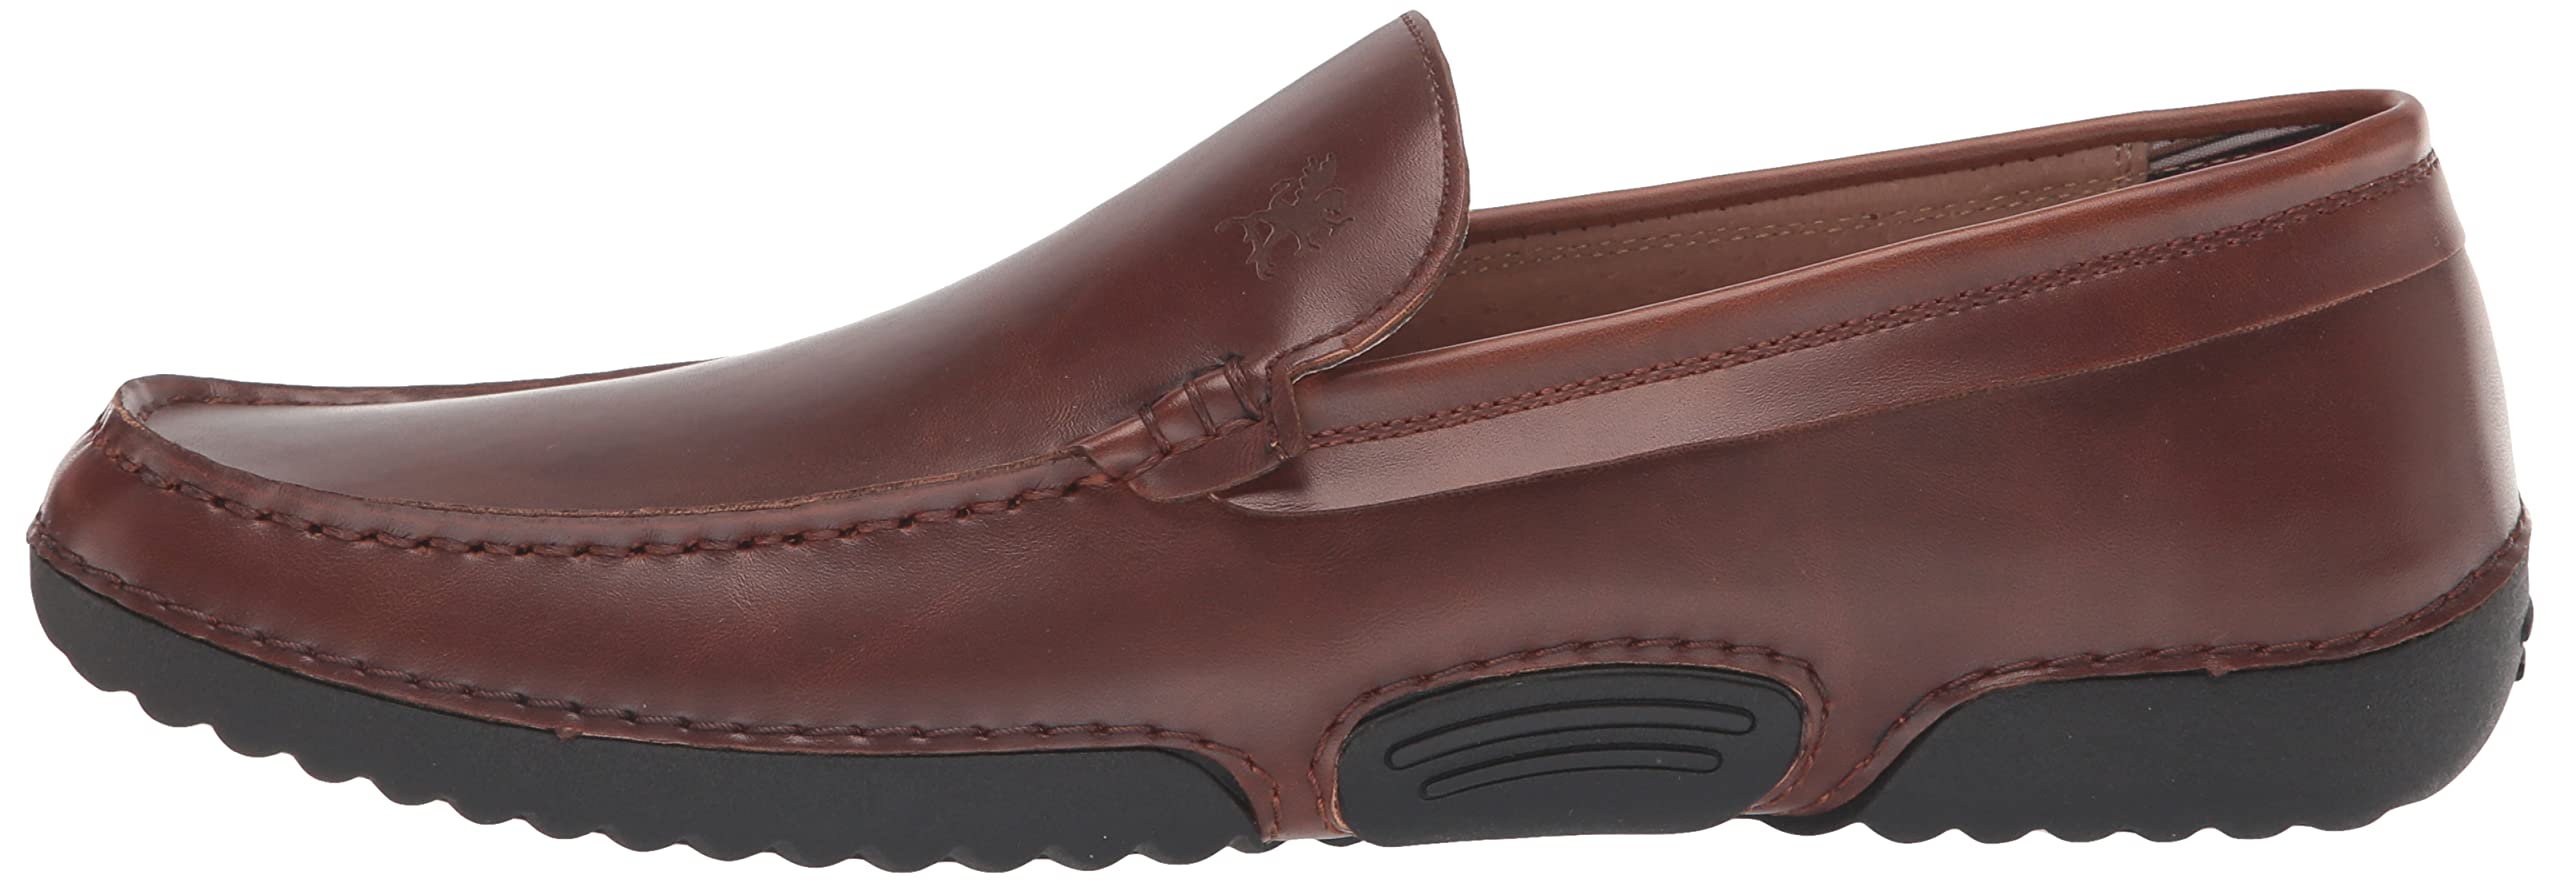 Stacy Adams Men's Del Slip On Driving Style Loafer, Brown, 14